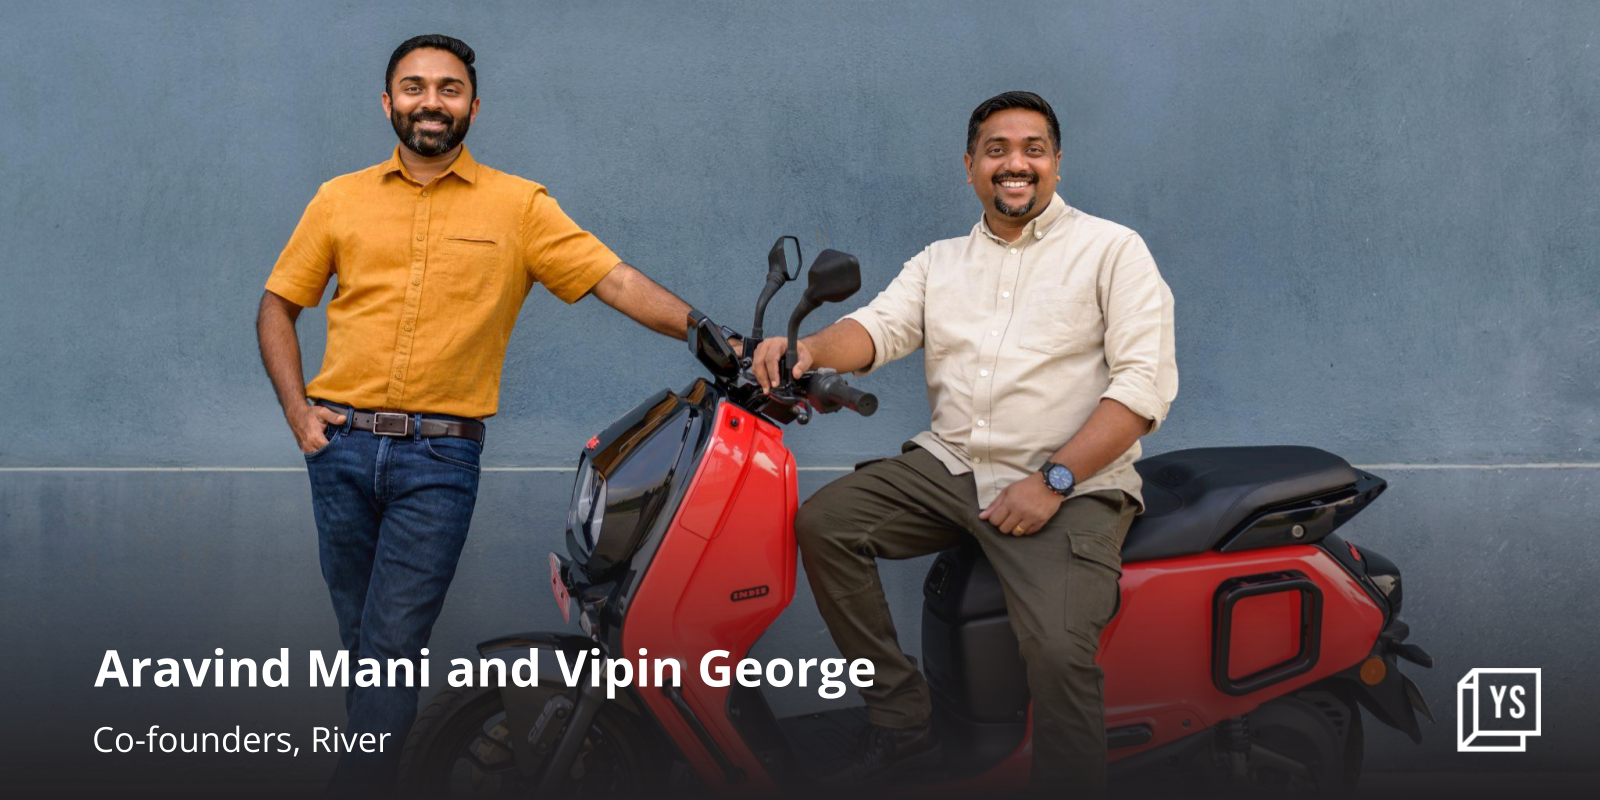 EV scooter maker River raises $40M in funding round led by Yamaha Motor Co